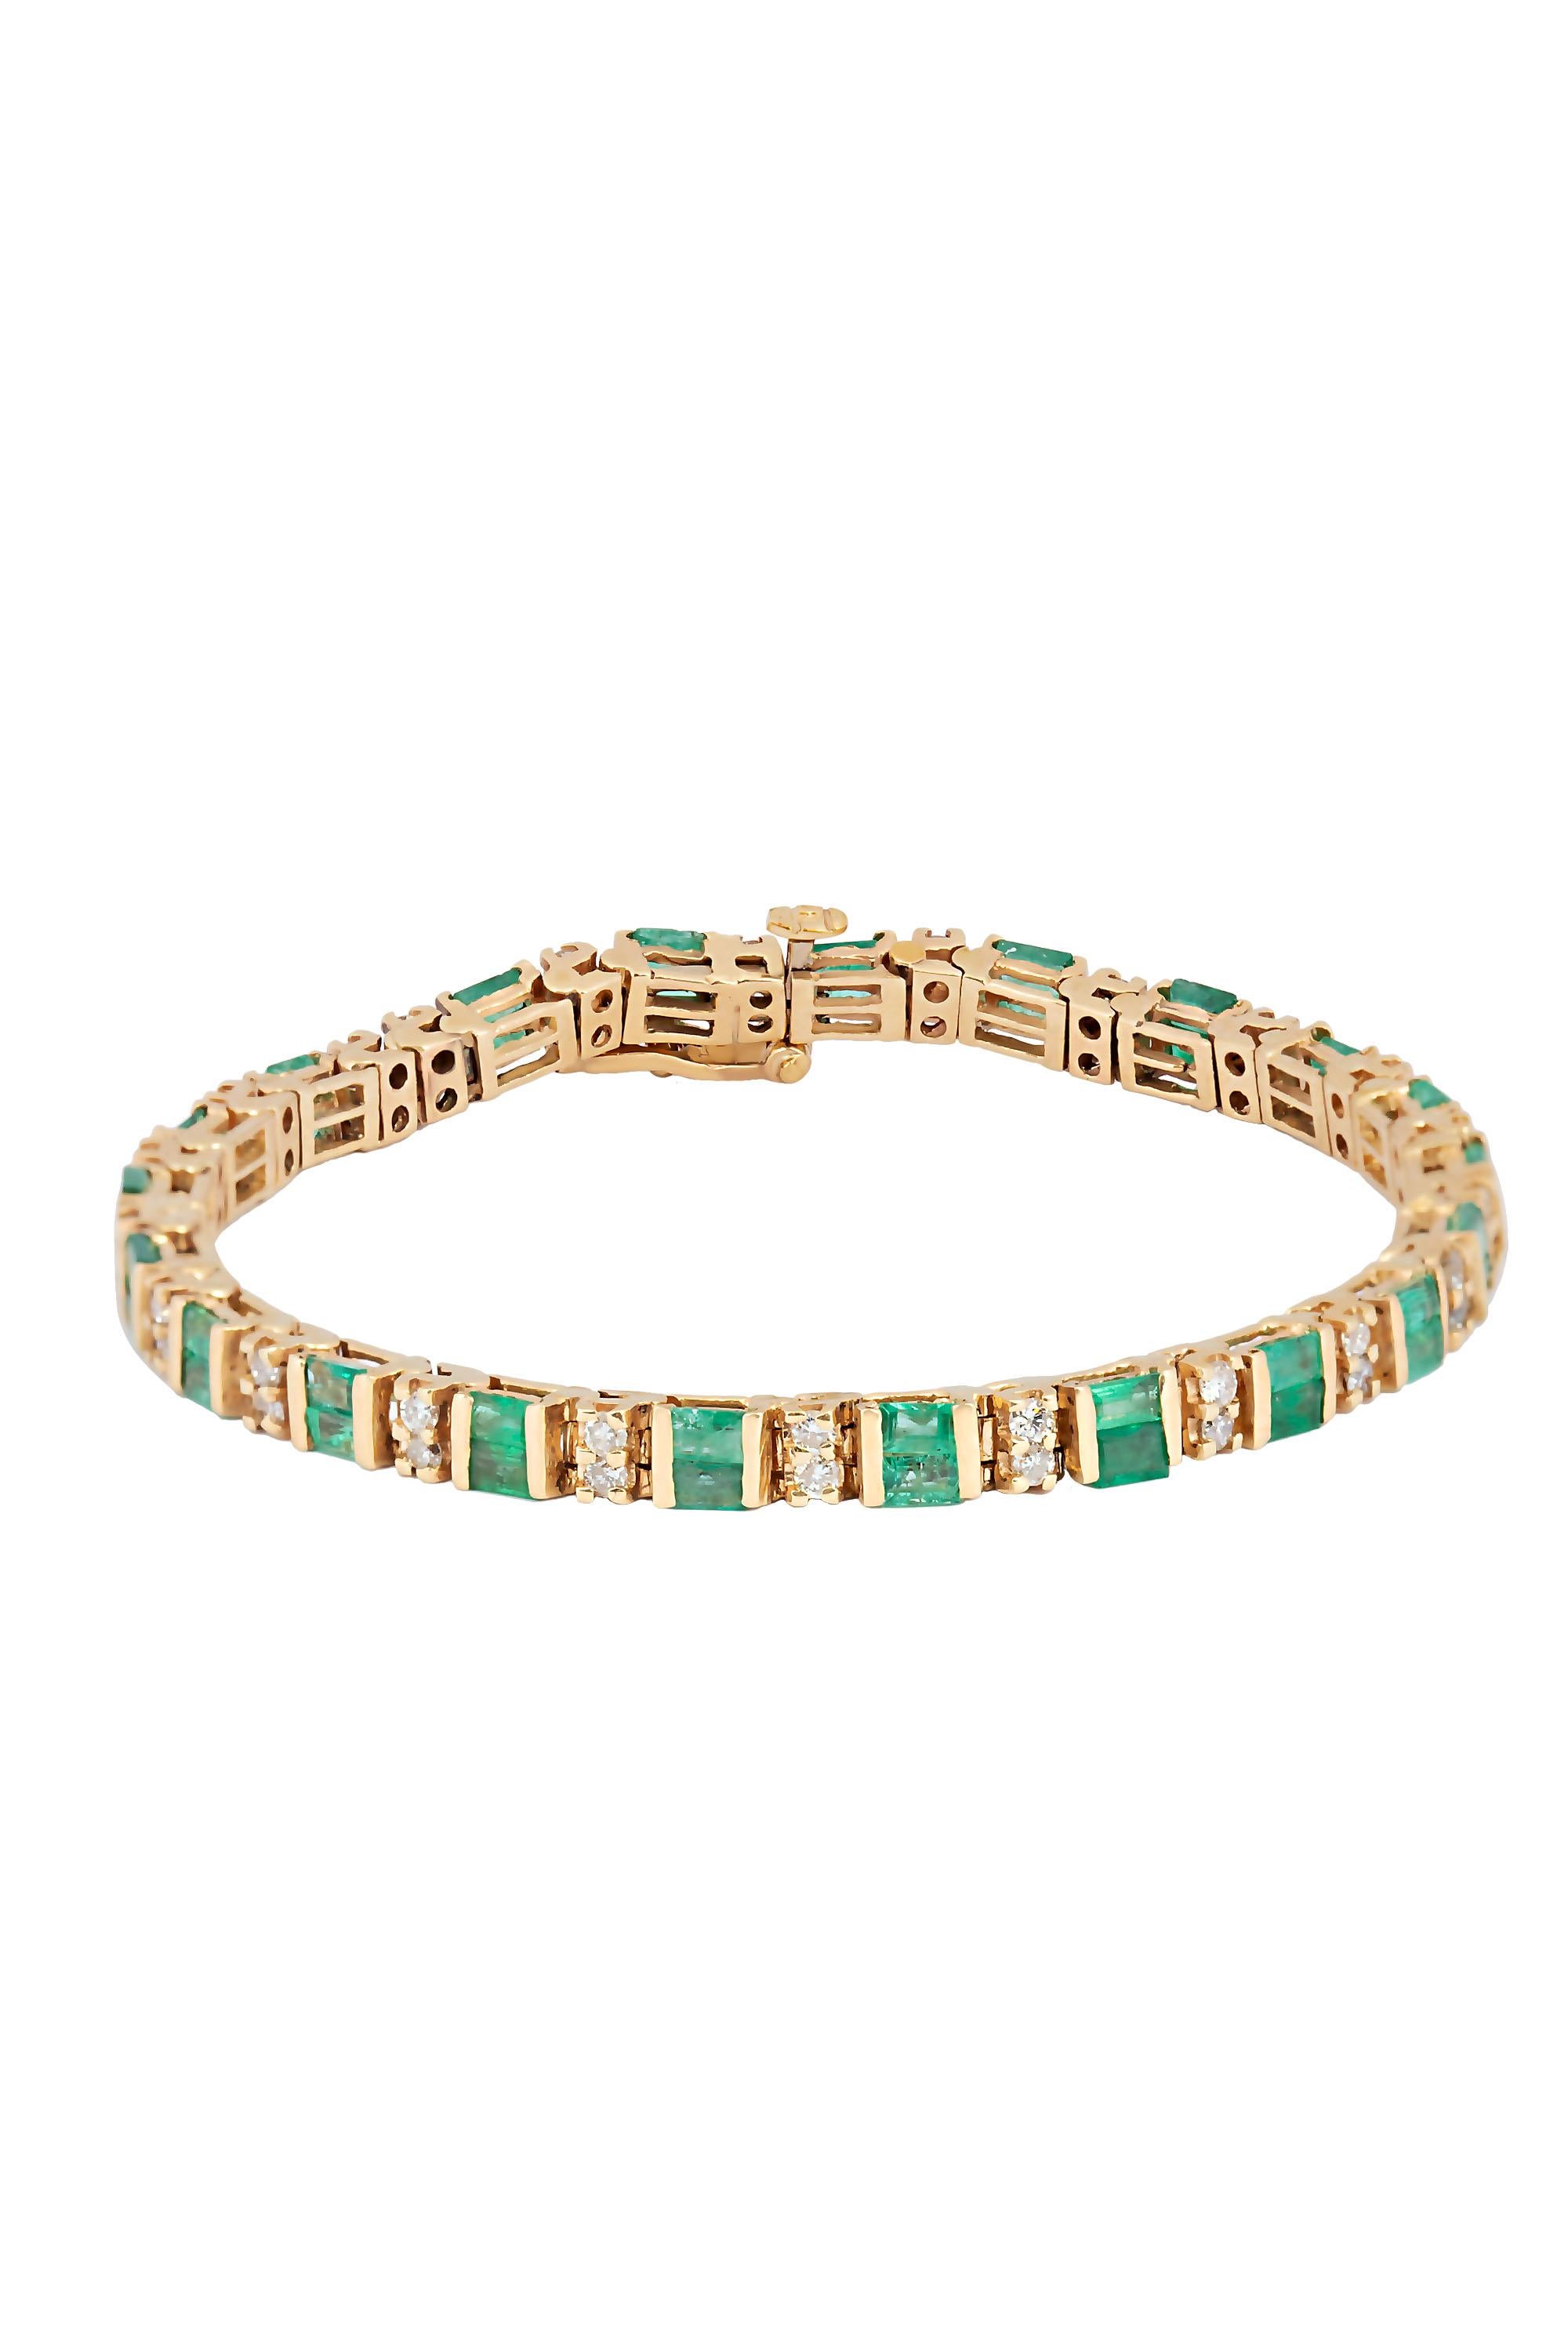 A classic tailored tennis bracelet crafted in 18 karat yellow gold and composed of rows of double stacked emerald baguettes interspersed by stations of double stacked round brilliant diamonds. Set with a total of 4.20 carats in emeralds and 1.32